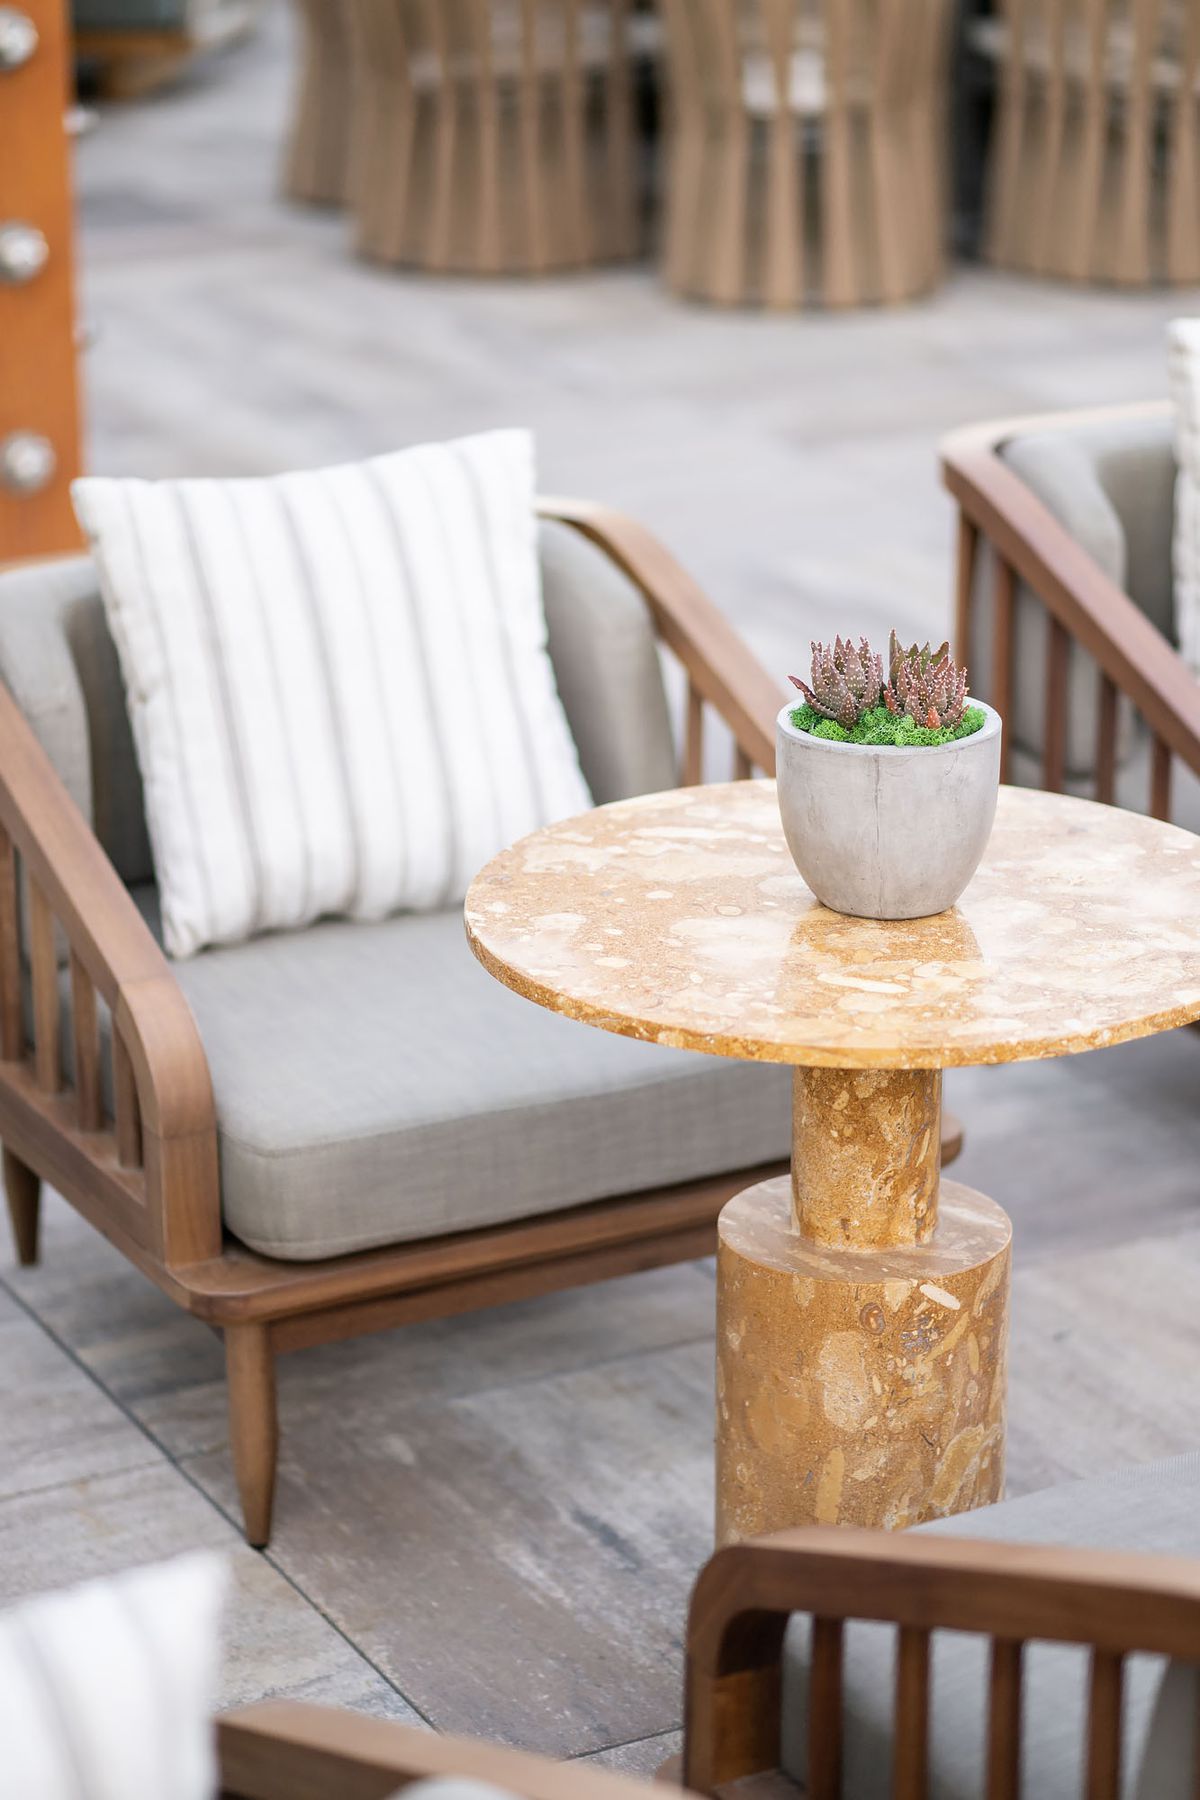 An off-tan table with marble looks at a new rooftop restaurant at sunset.